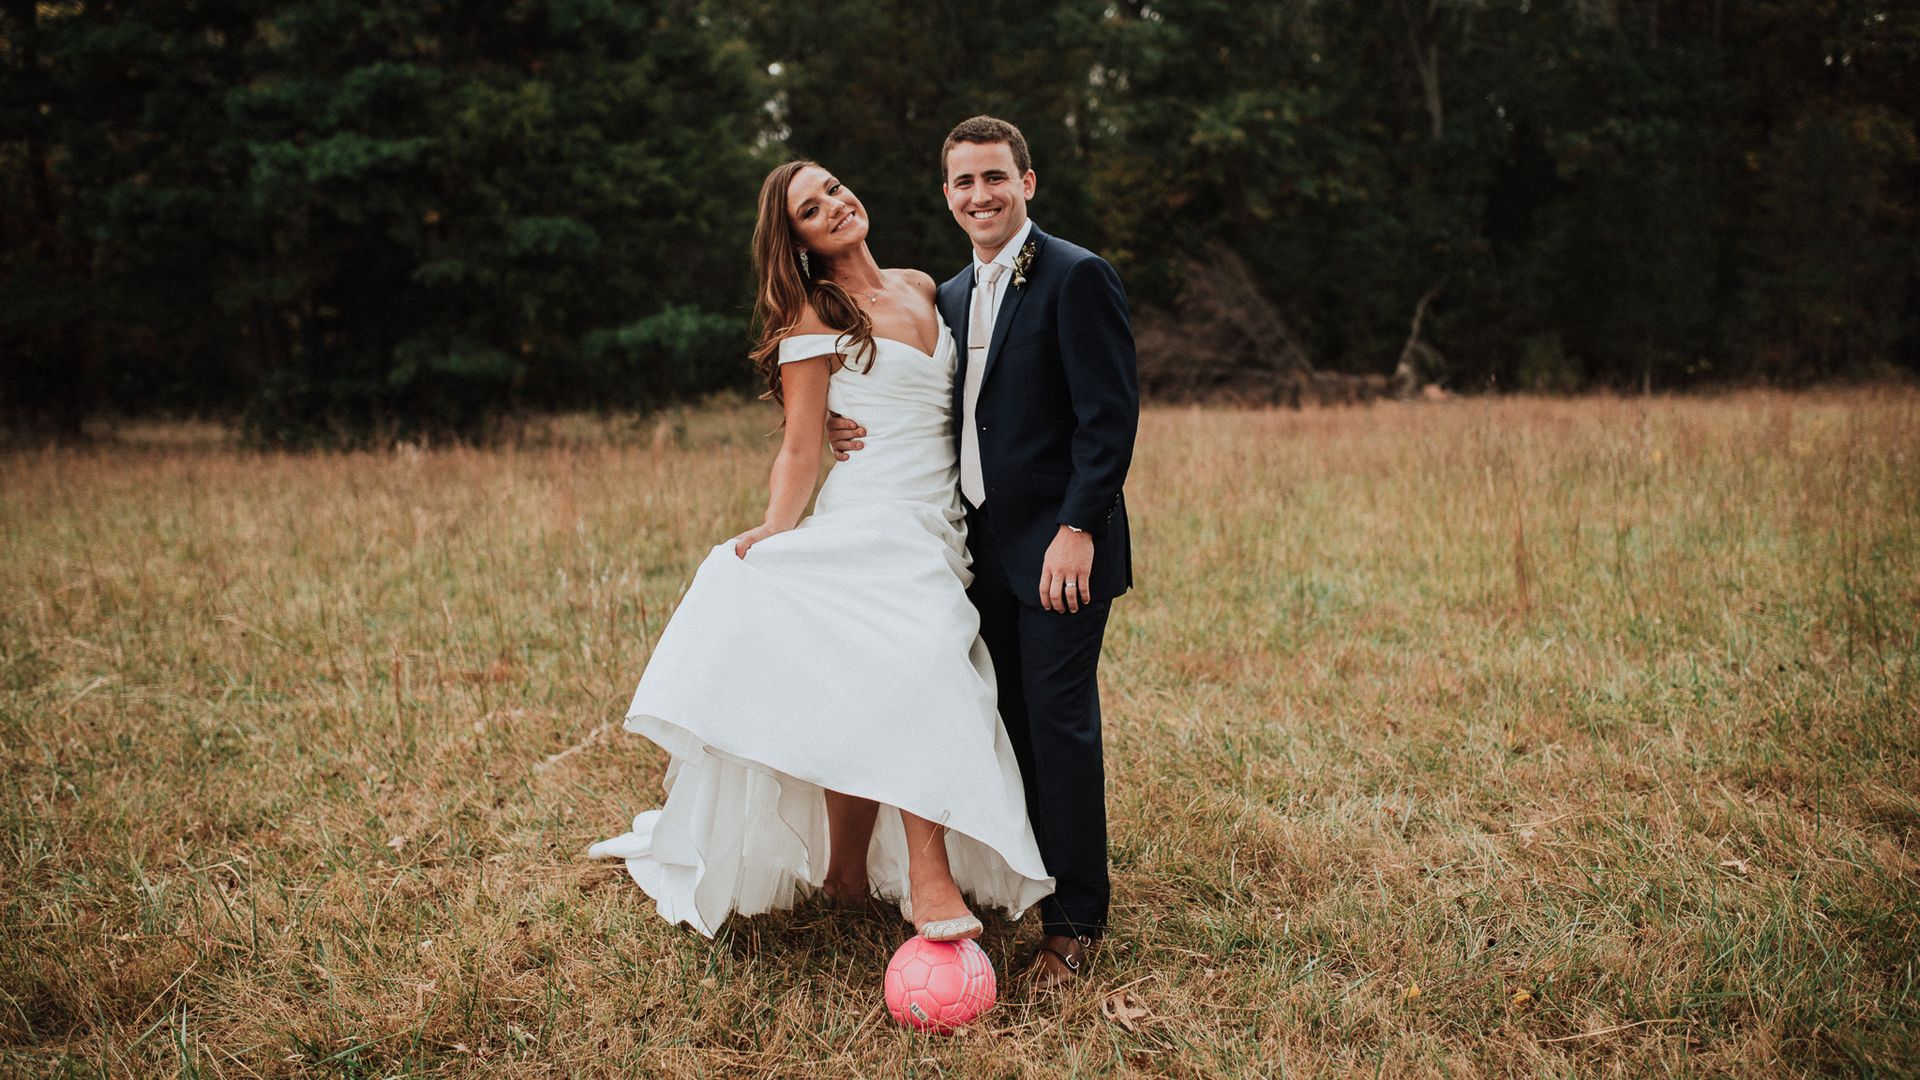 Two people, one in a wedding dress and the other in a tuxedo, posing over a soccer ball 